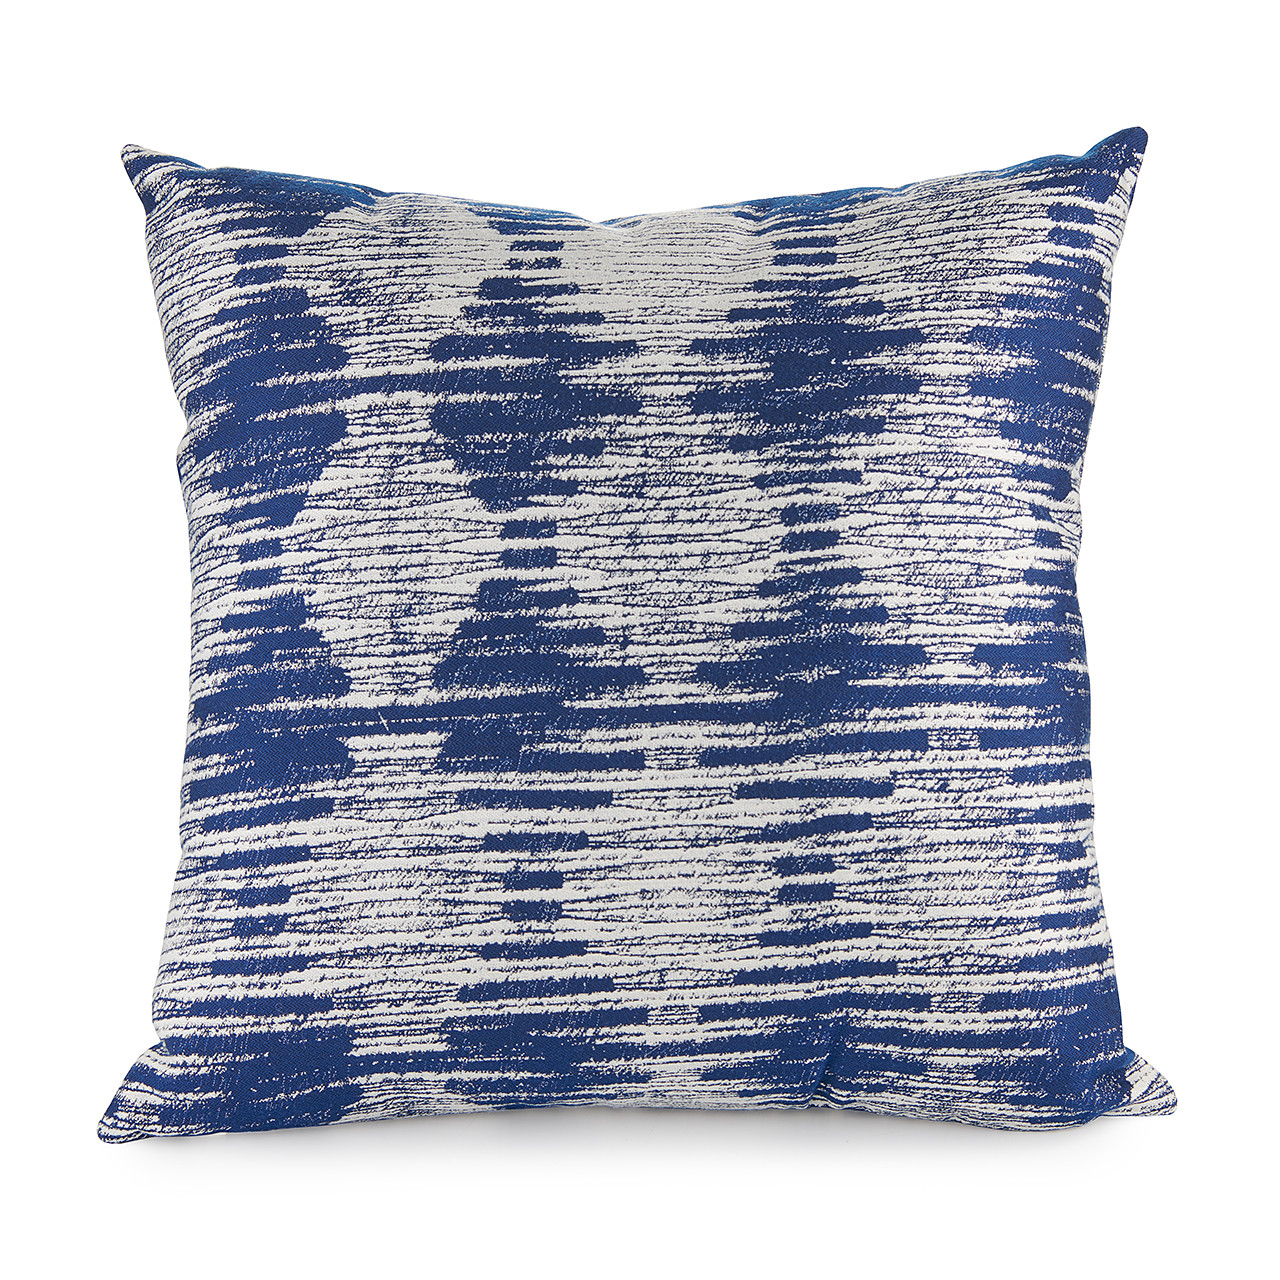 Navy Beacon Stormy 18 x 18 in. Pillow